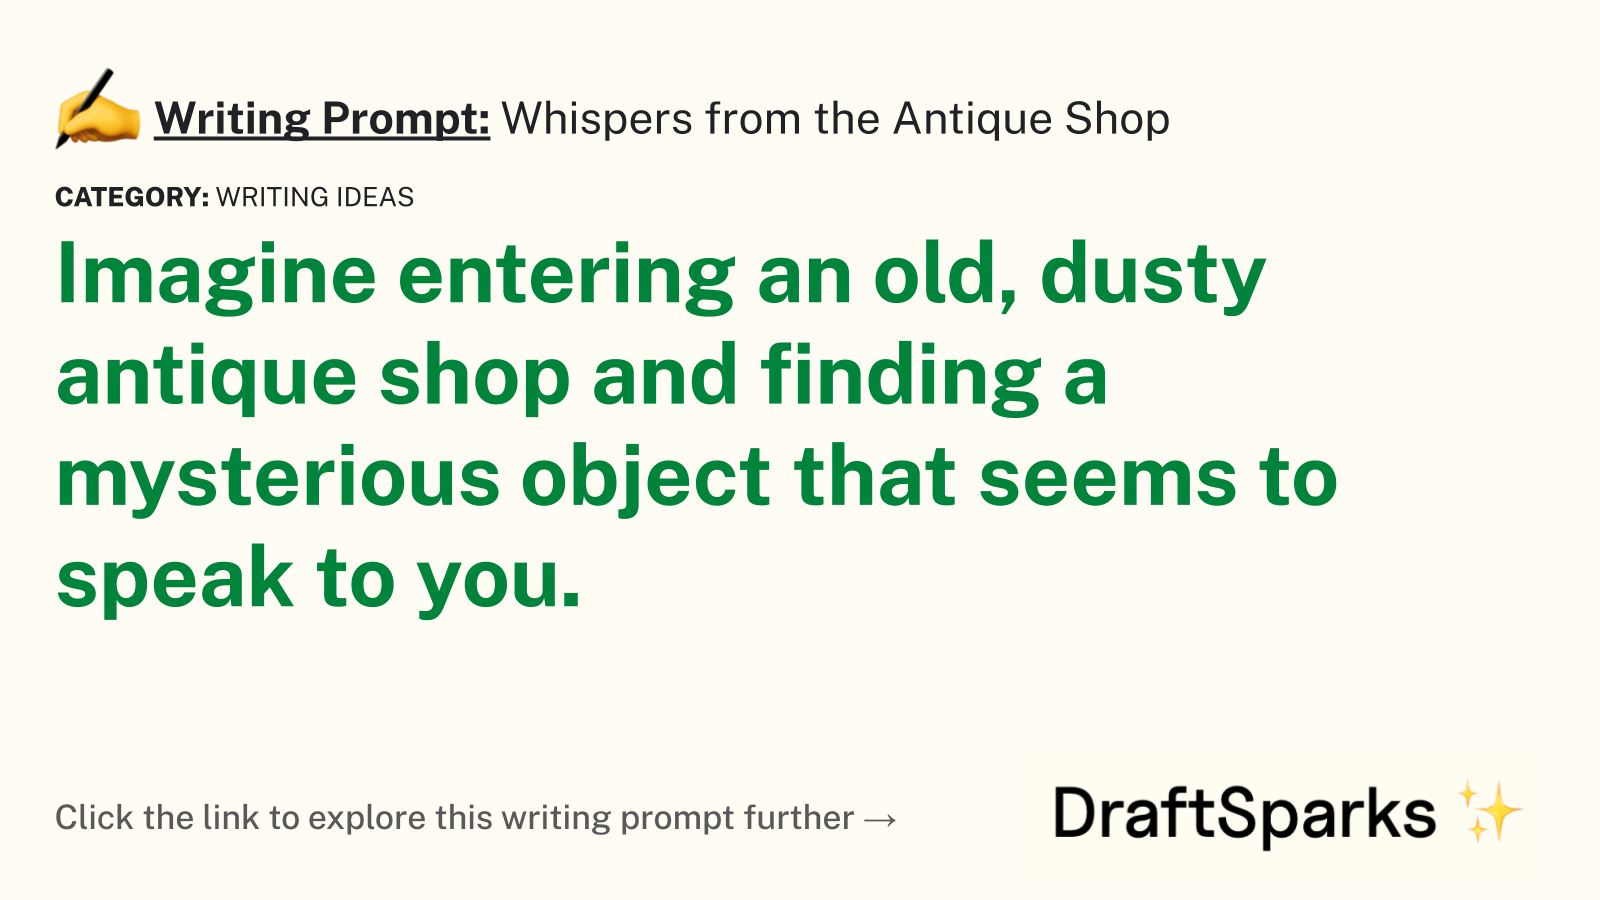 Whispers from the Antique Shop